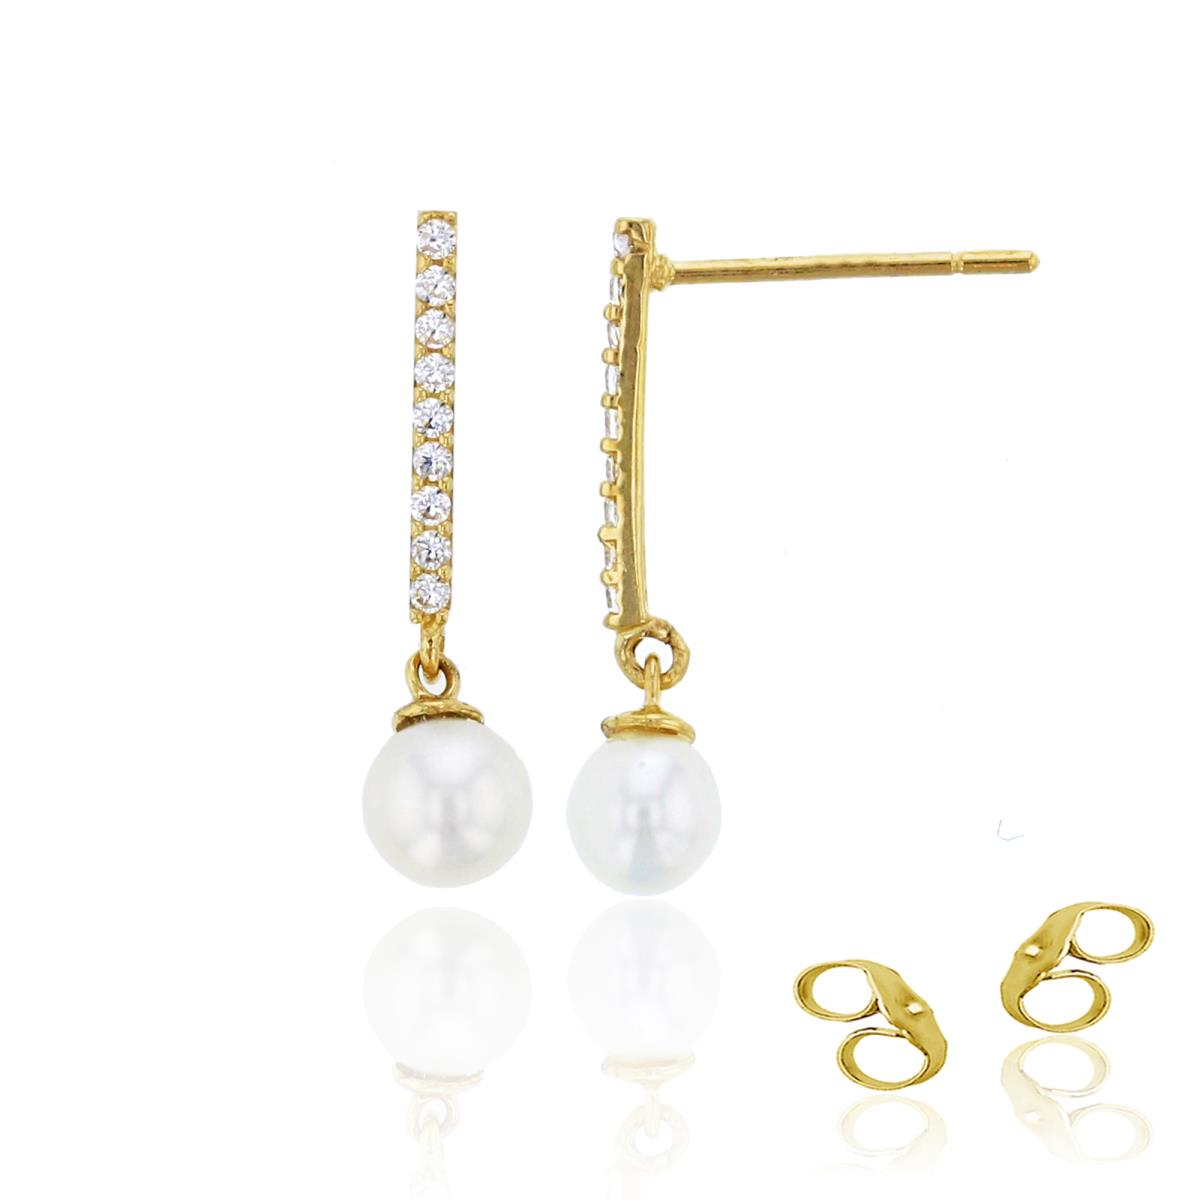 14K Yellow Gold Pave Dangling 4mm Fresh Water Pearl & Cr. White Sapphire Drop Earring with 4.5mm Clutch